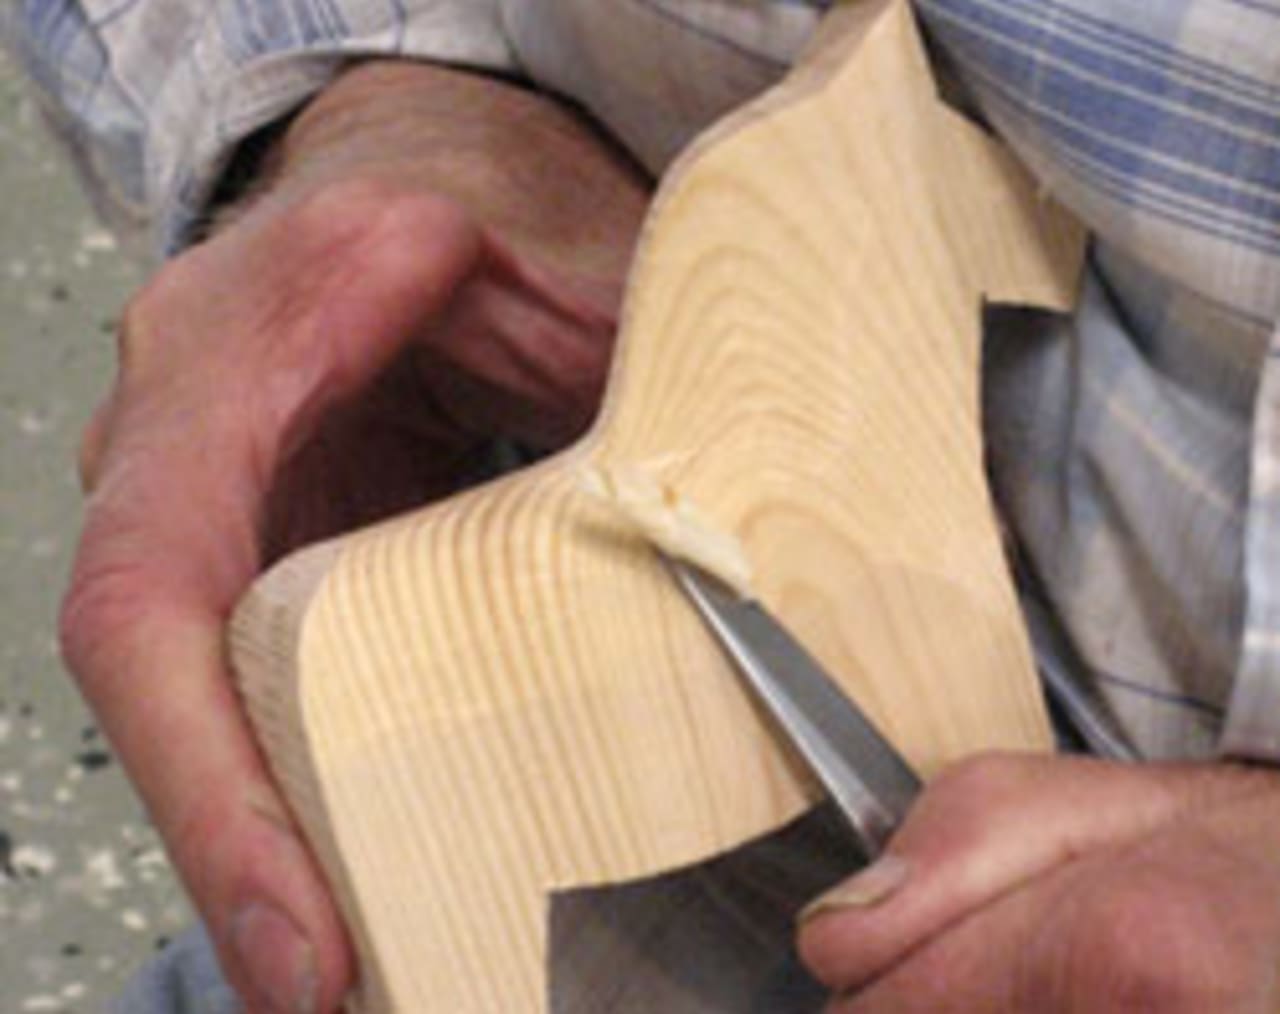 Basics in Woodcarving Workshop to be held at Muscoot Farm in Somers.